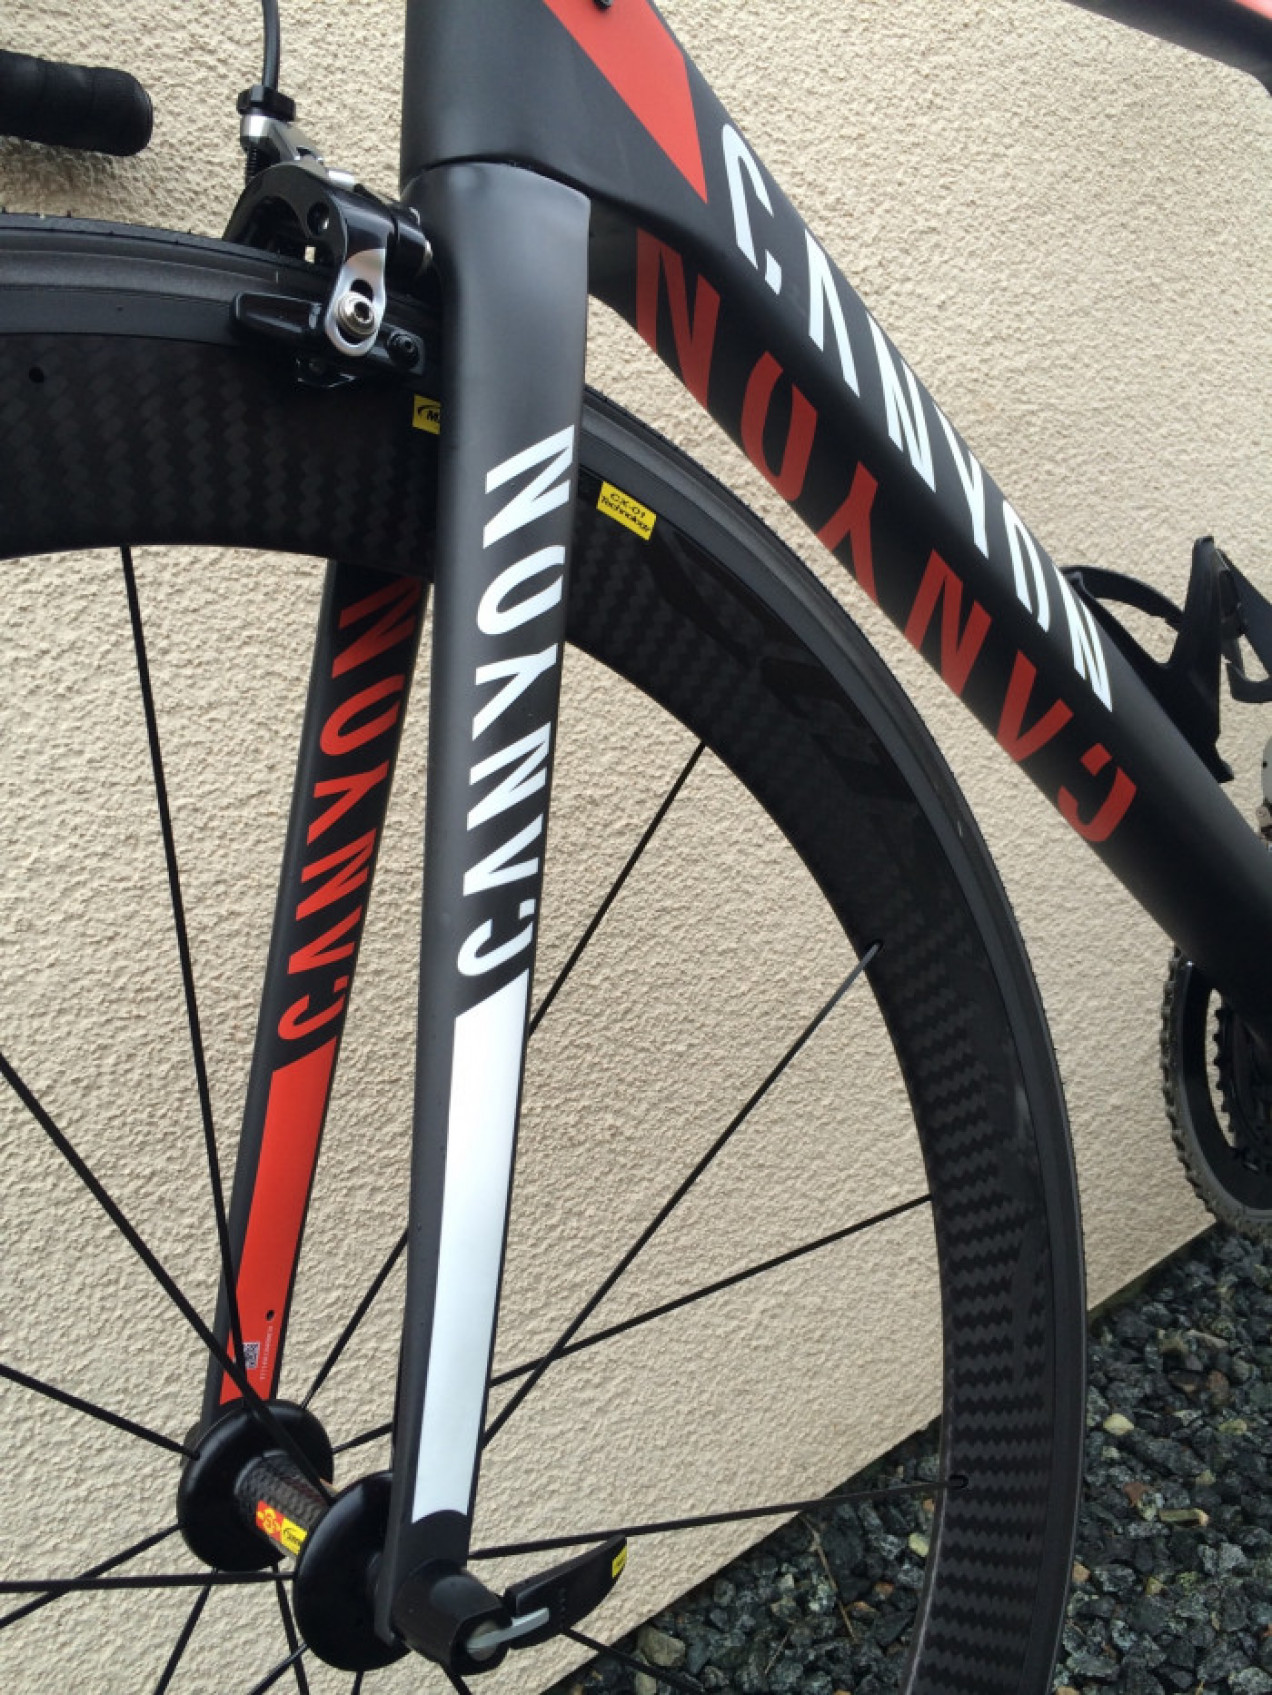 Canyon Ultimate CF SLX 9.0 used in 60 cm | buycycle